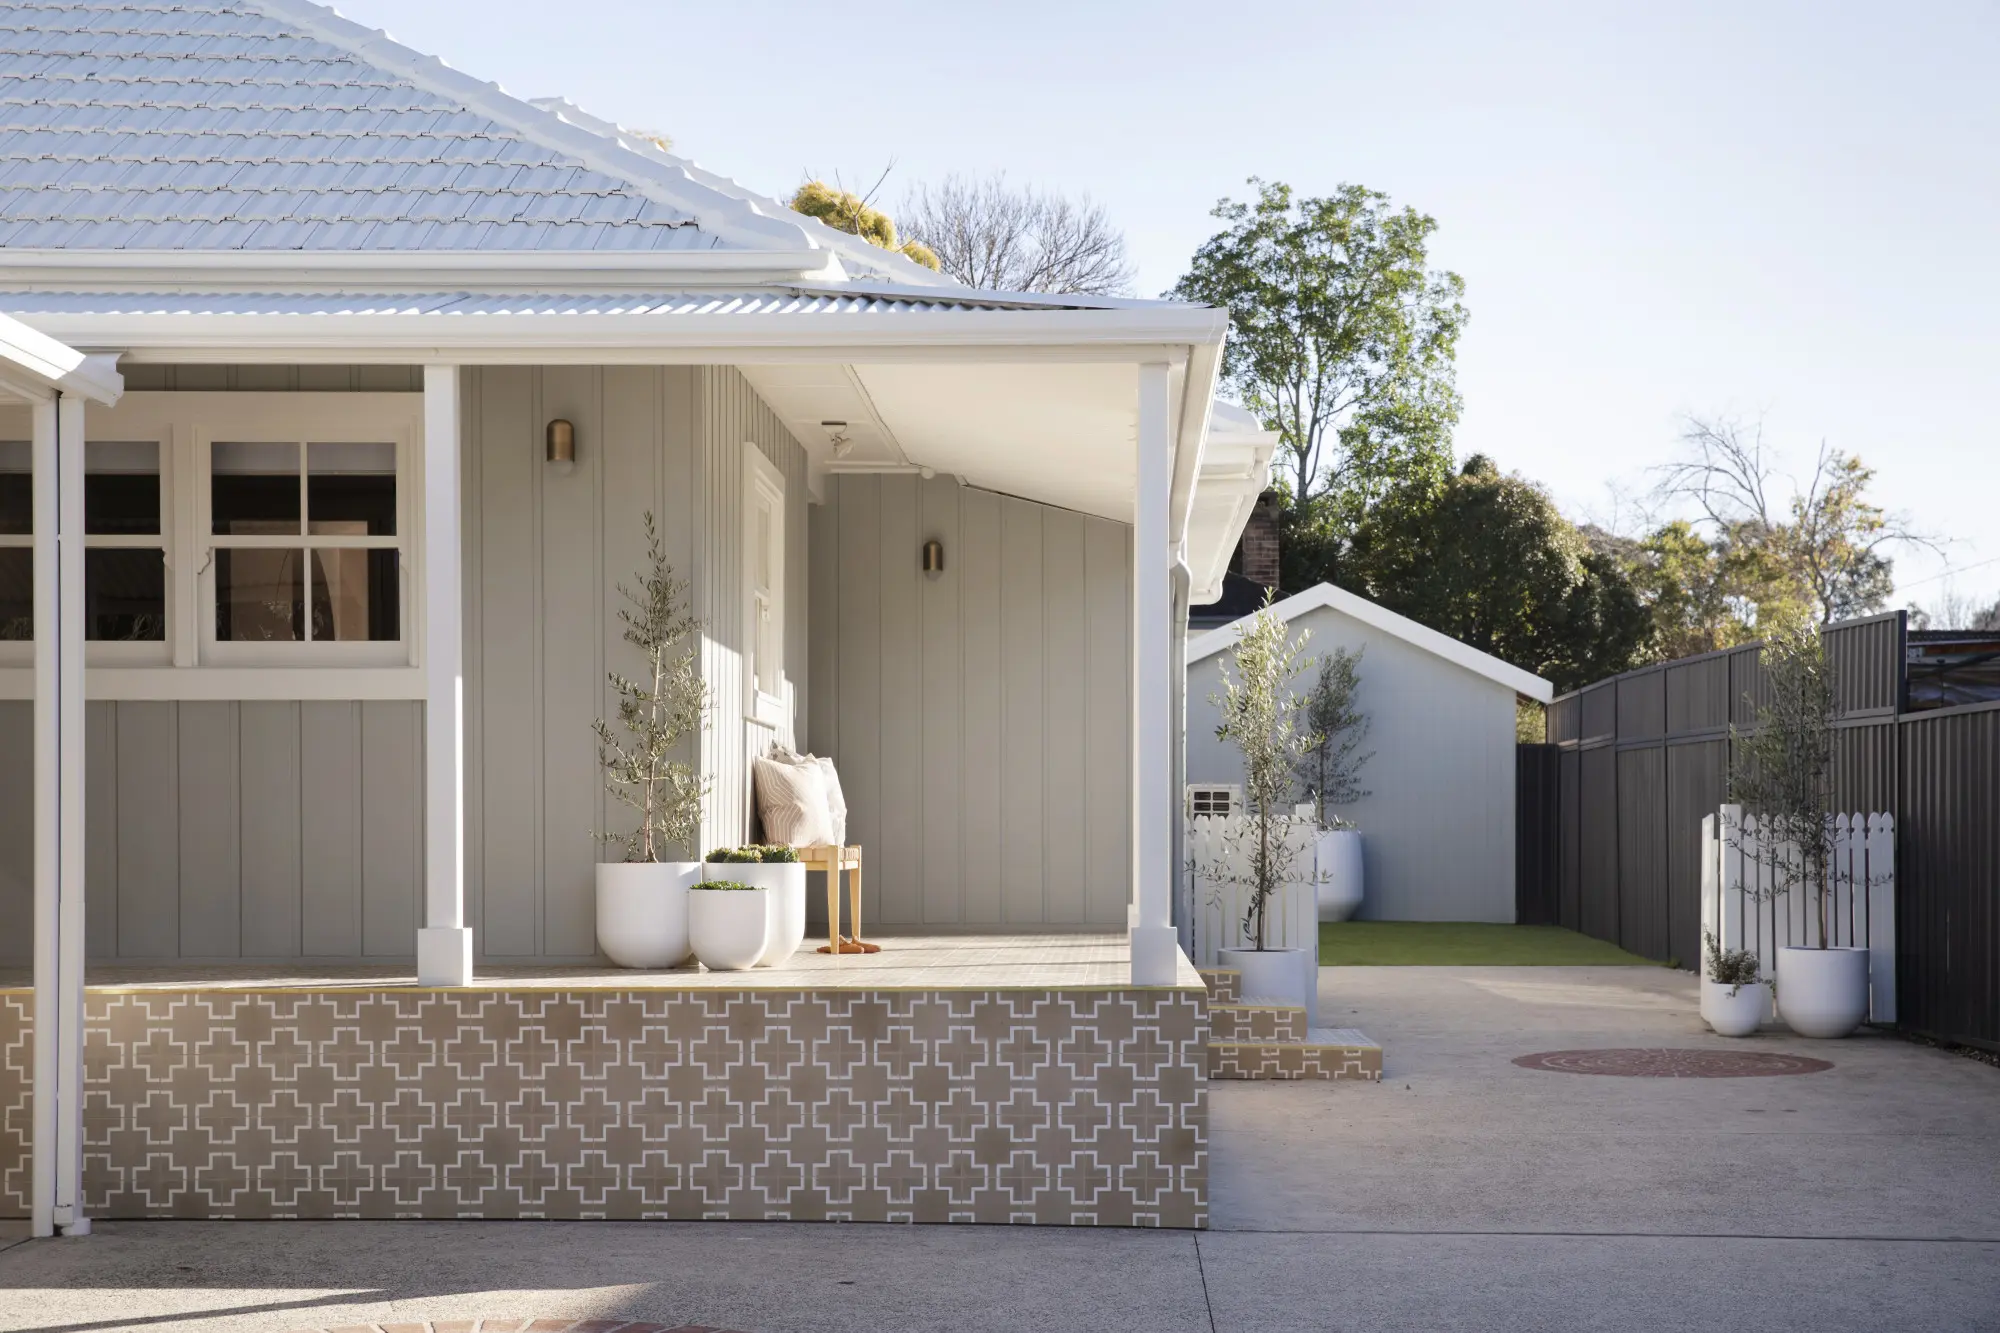 Front wrap around verandah with tiled floors, walls painted in Dulux Pozieres and trims painted in Dulux White Dune.